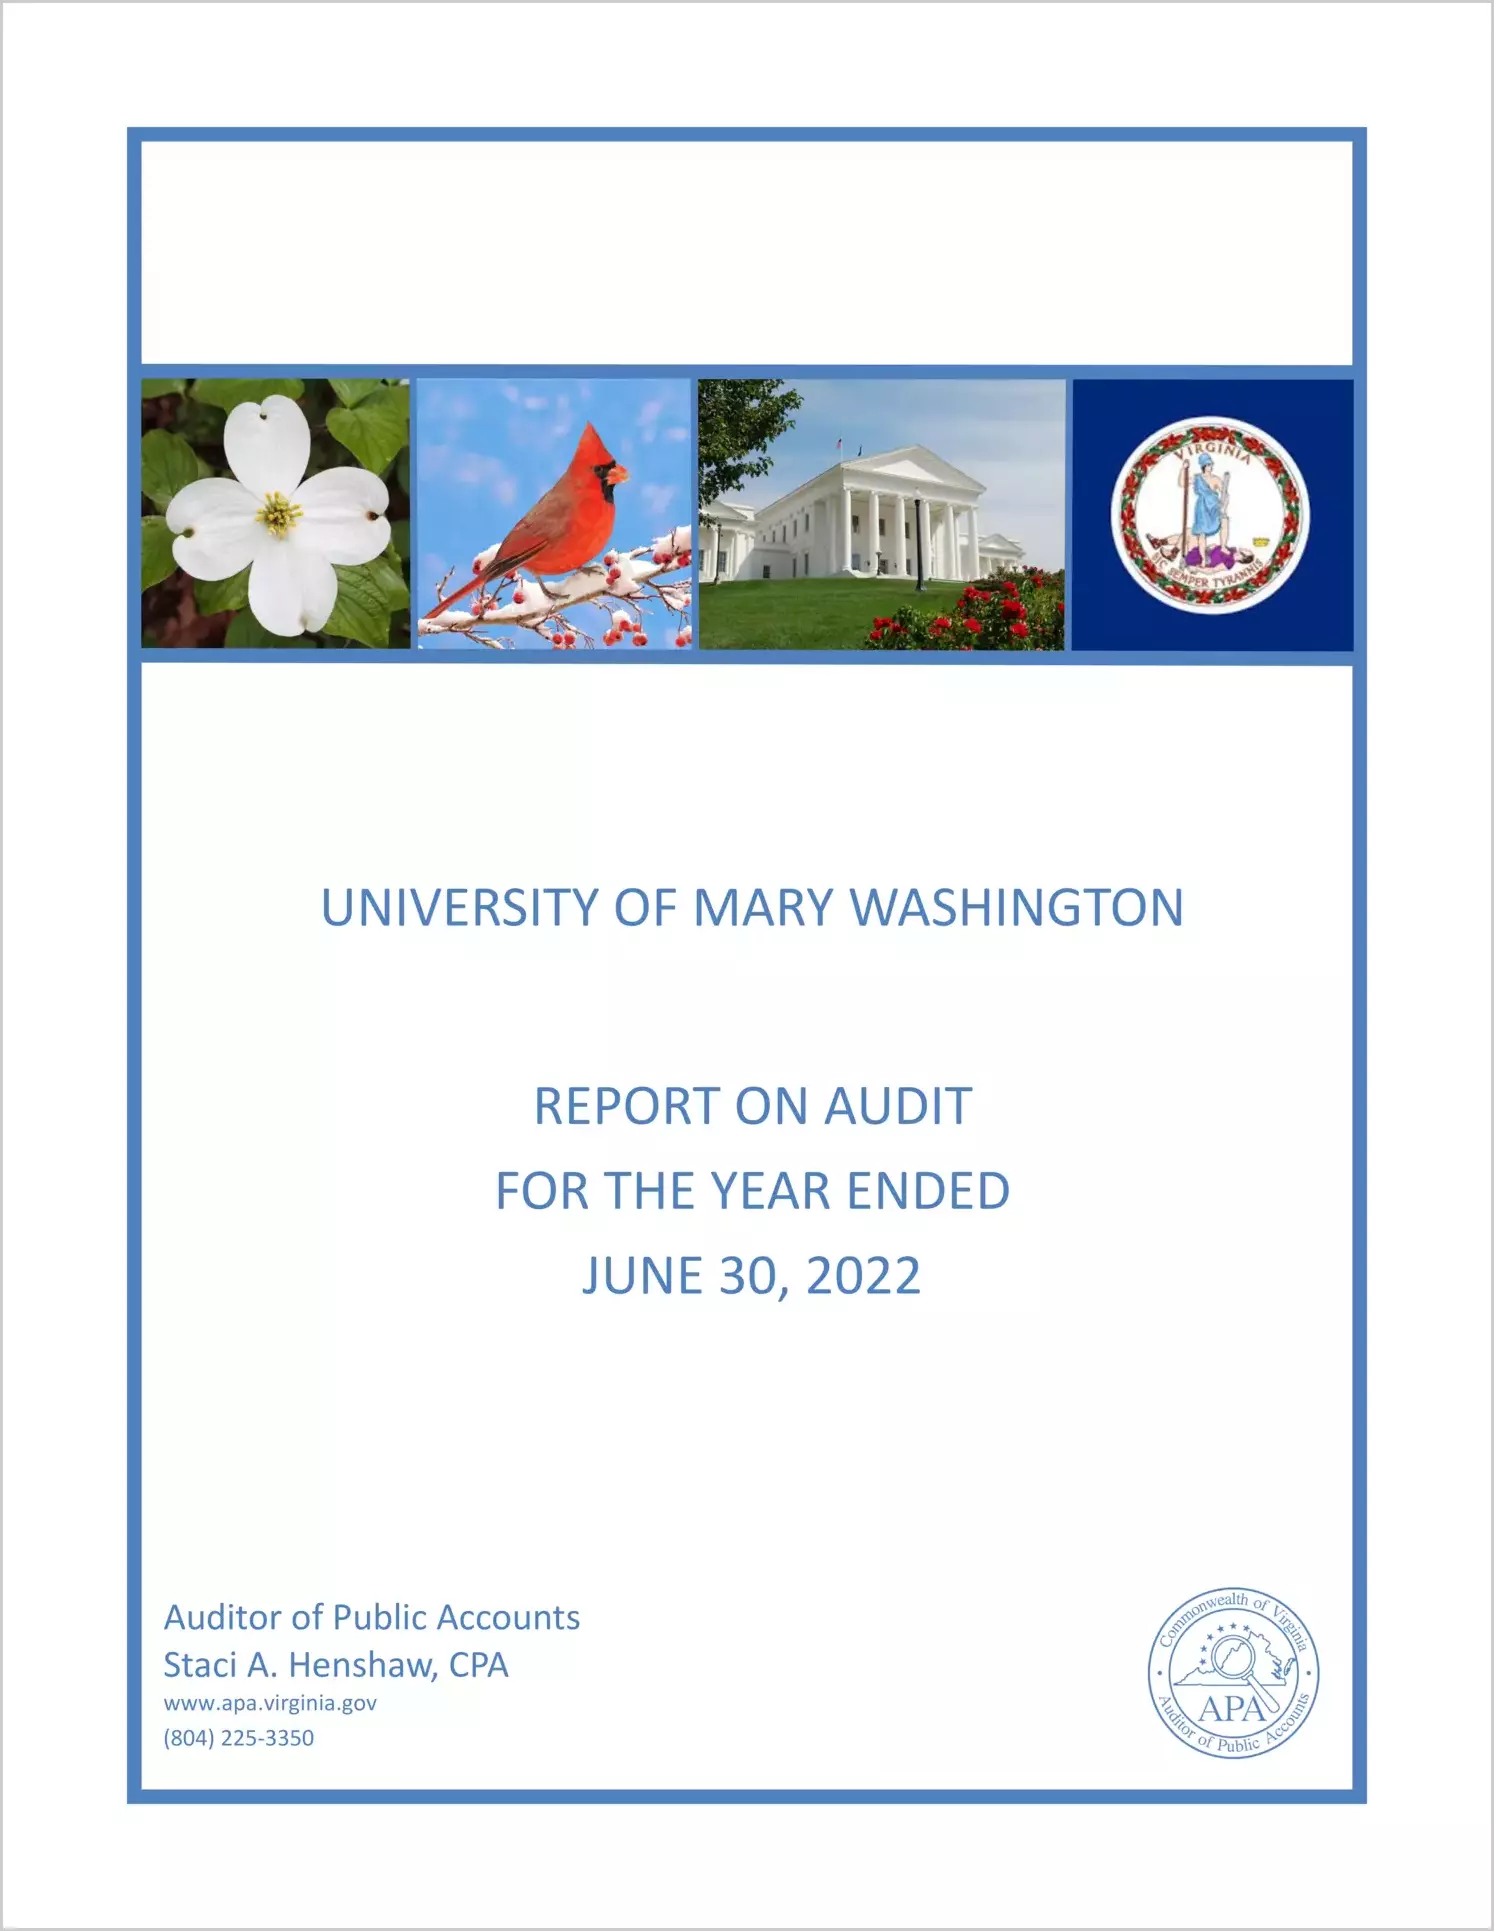 University of Mary Washington for the year ended June 30, 2022